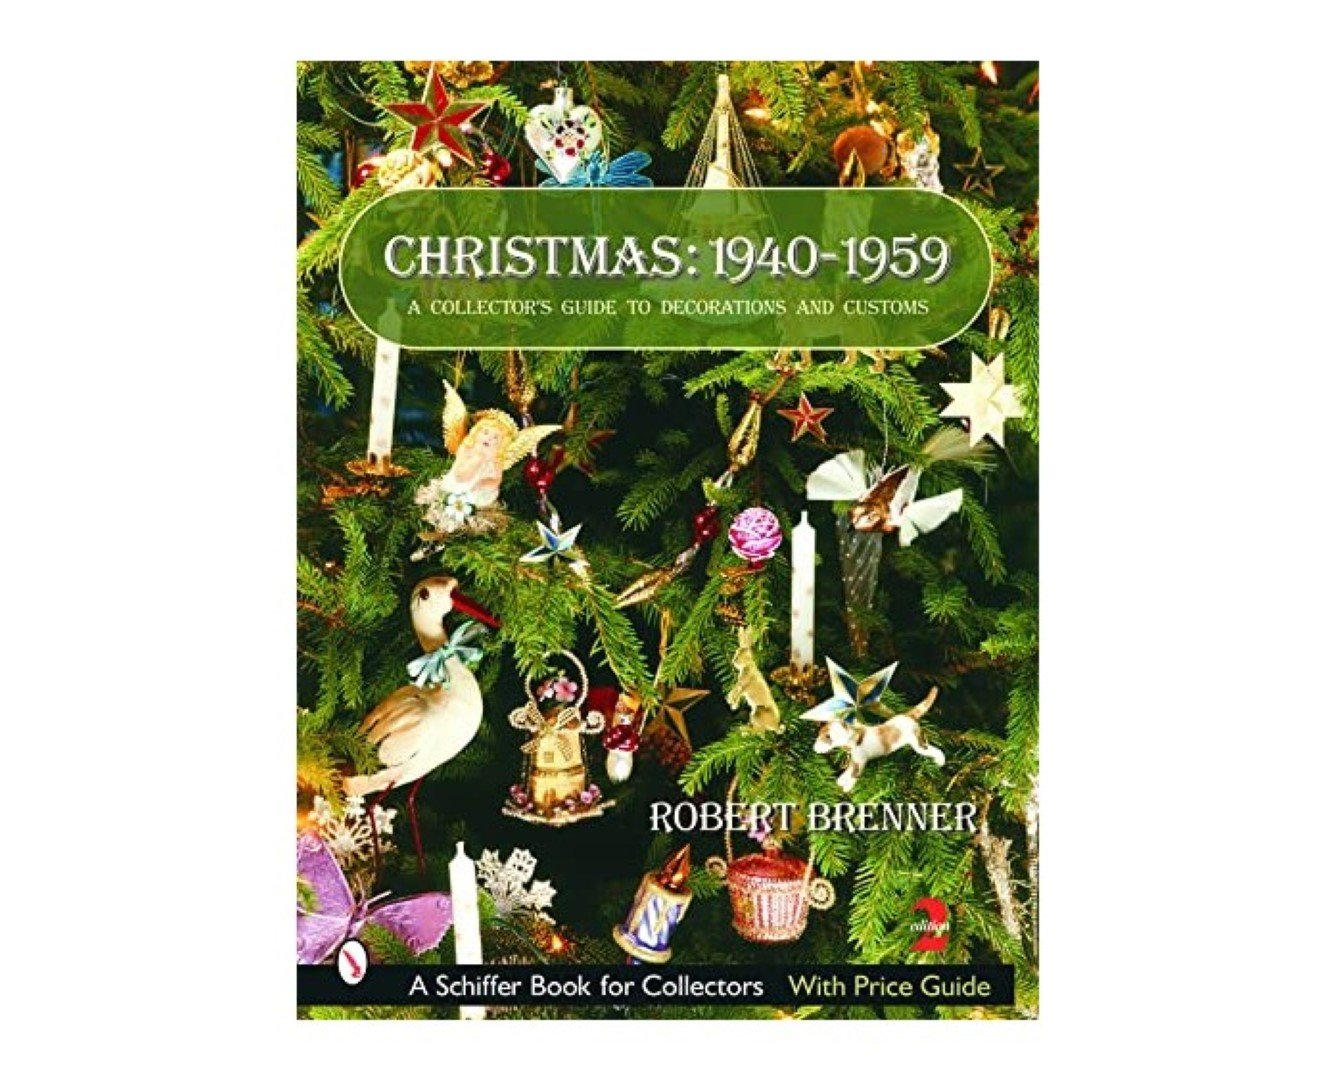 Brenner, Robert - Christmas, 1940-1959: A Collector's Guide to Decorations and Customs  (2 nd. Ed.)